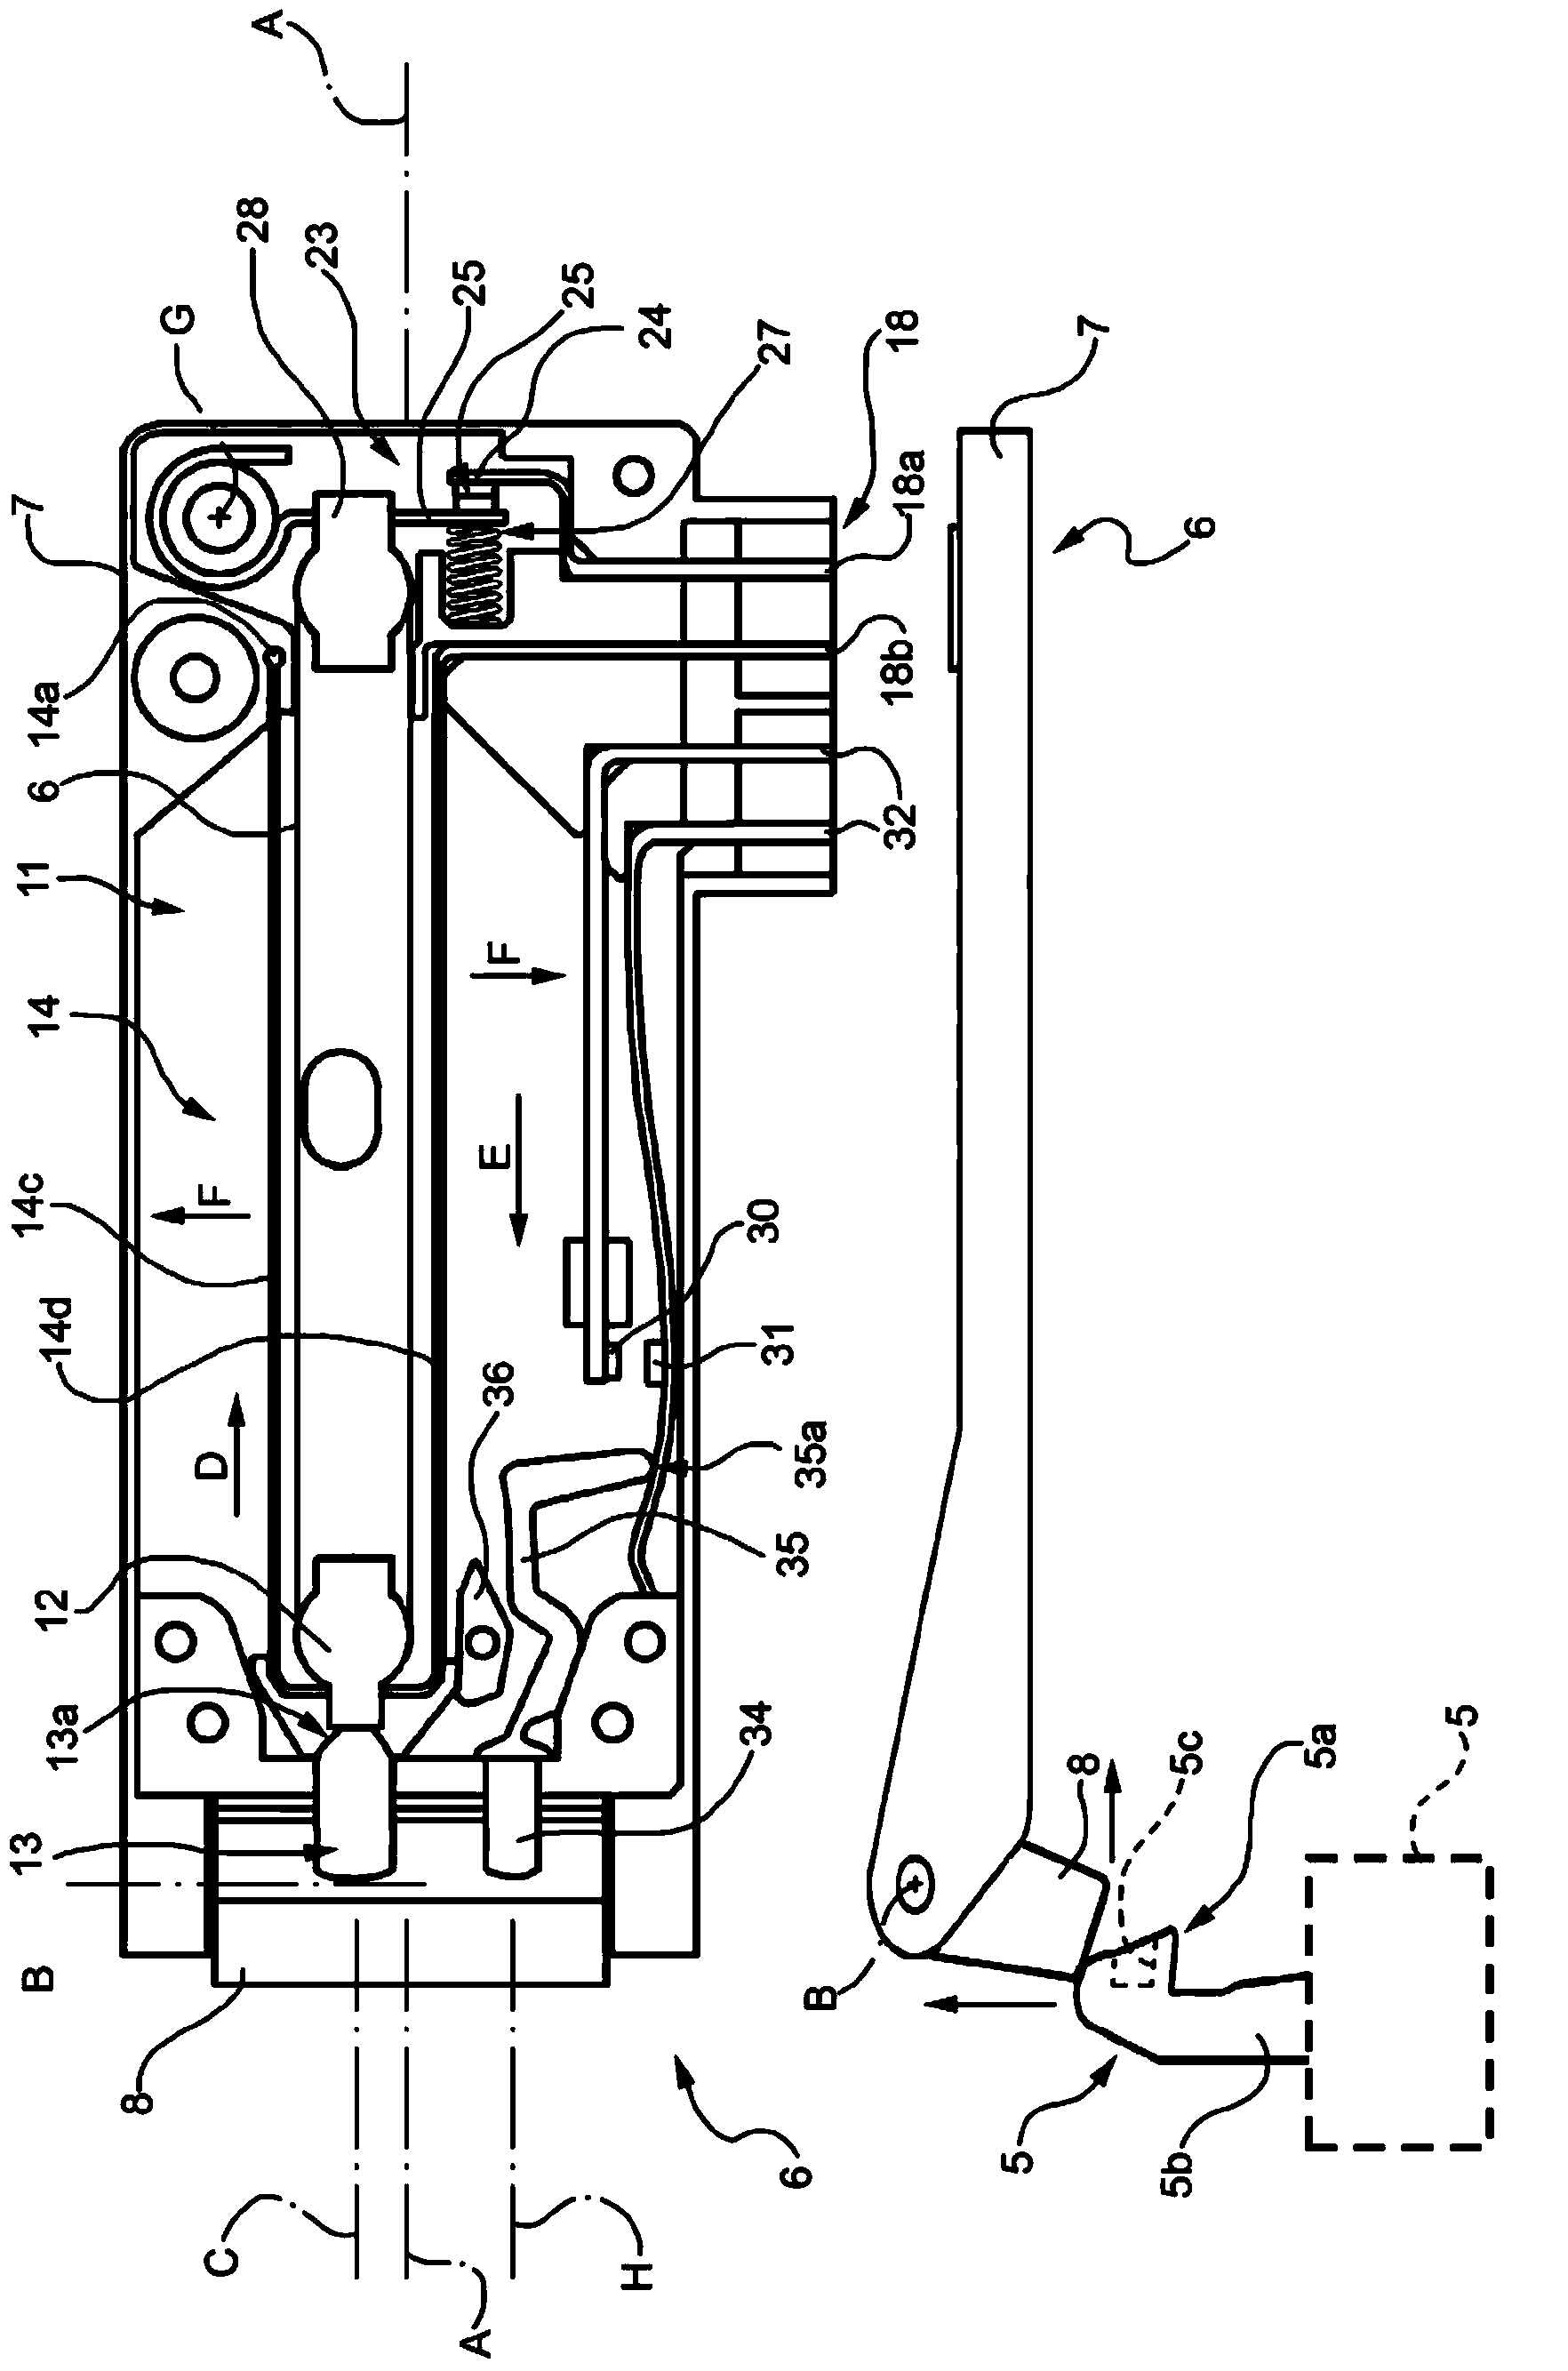 Electric household appliance door locking device